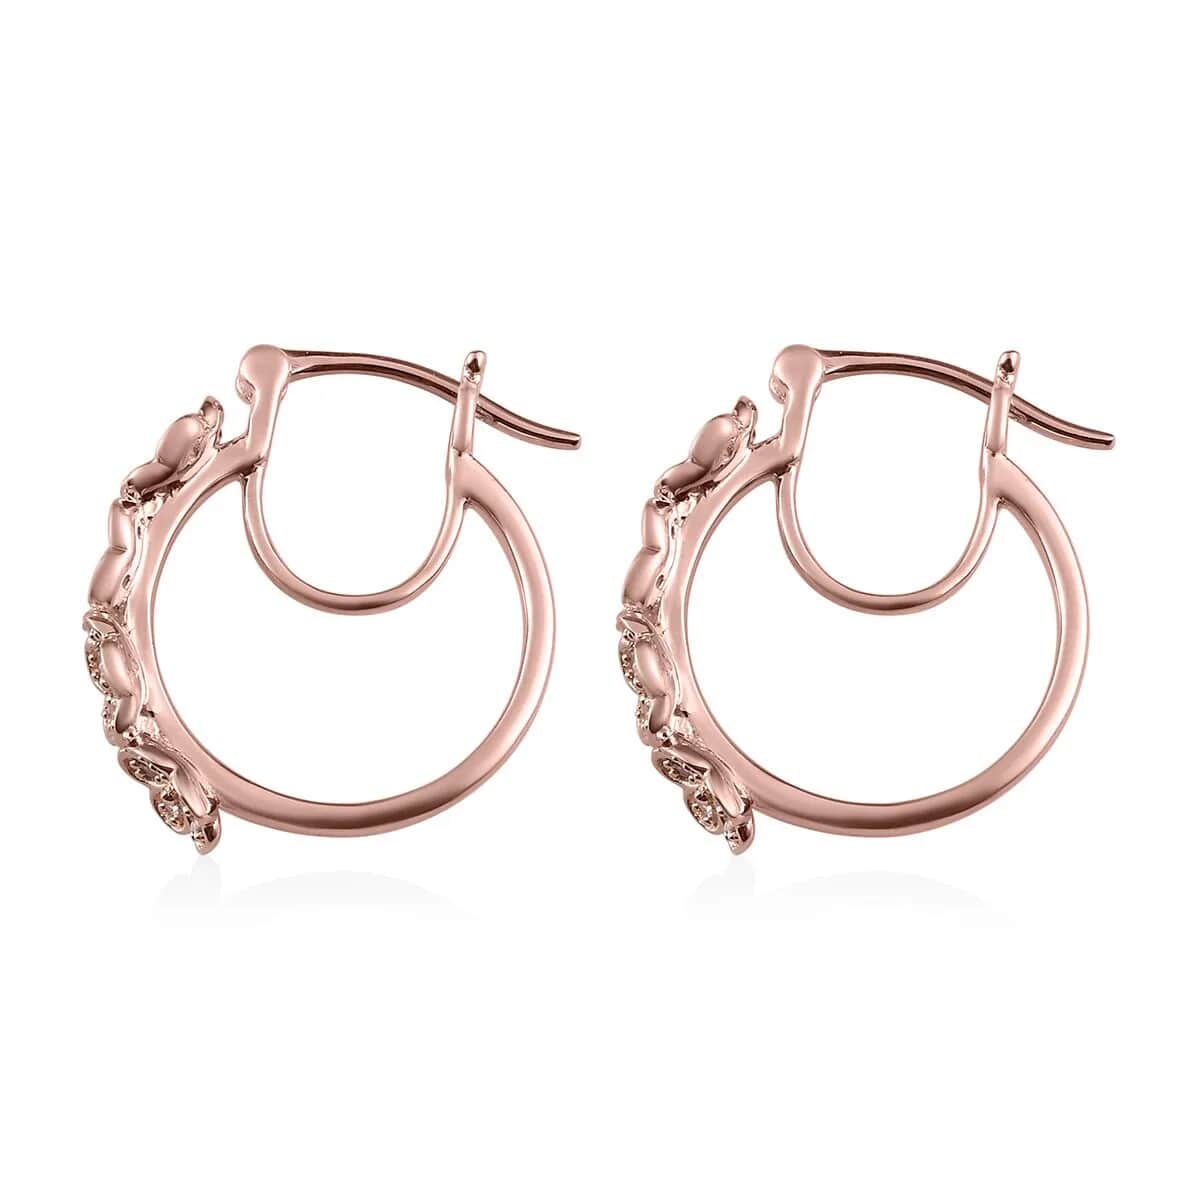 Uncut Natural Pink Diamond Floral Hoop Earrings, Vermeil Rose Gold Over Sterling Silver Earrings, Pink Diamond Jewelry For Her, Diamond Gifts 0.33 ctw image number 4